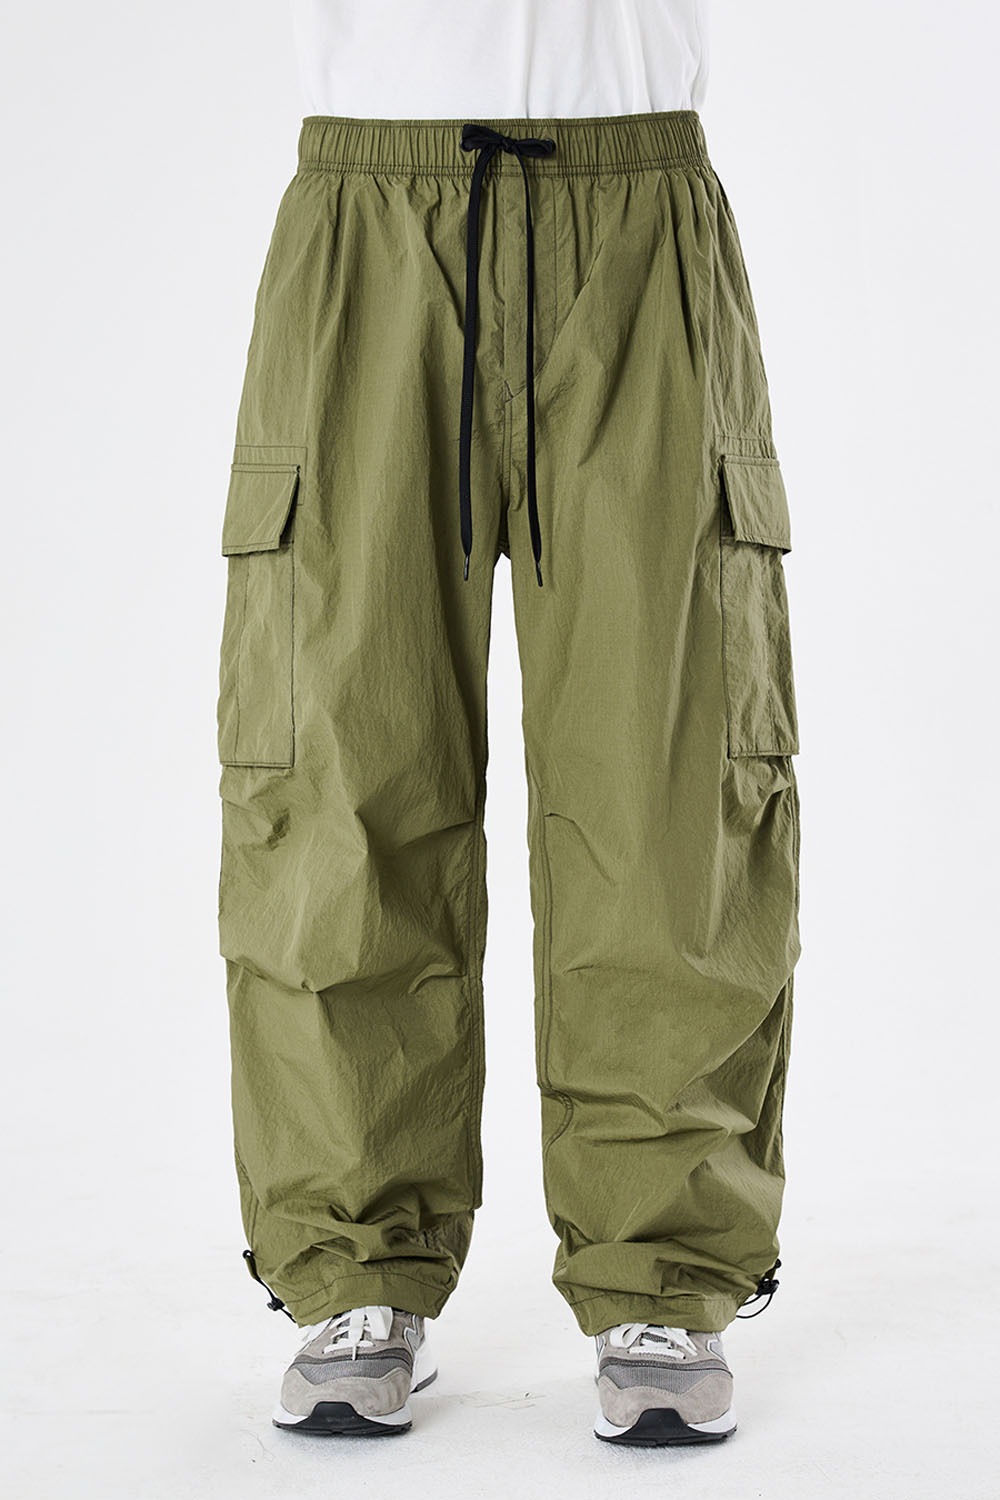 Over Mil 6p Pants-Olive Ripstop